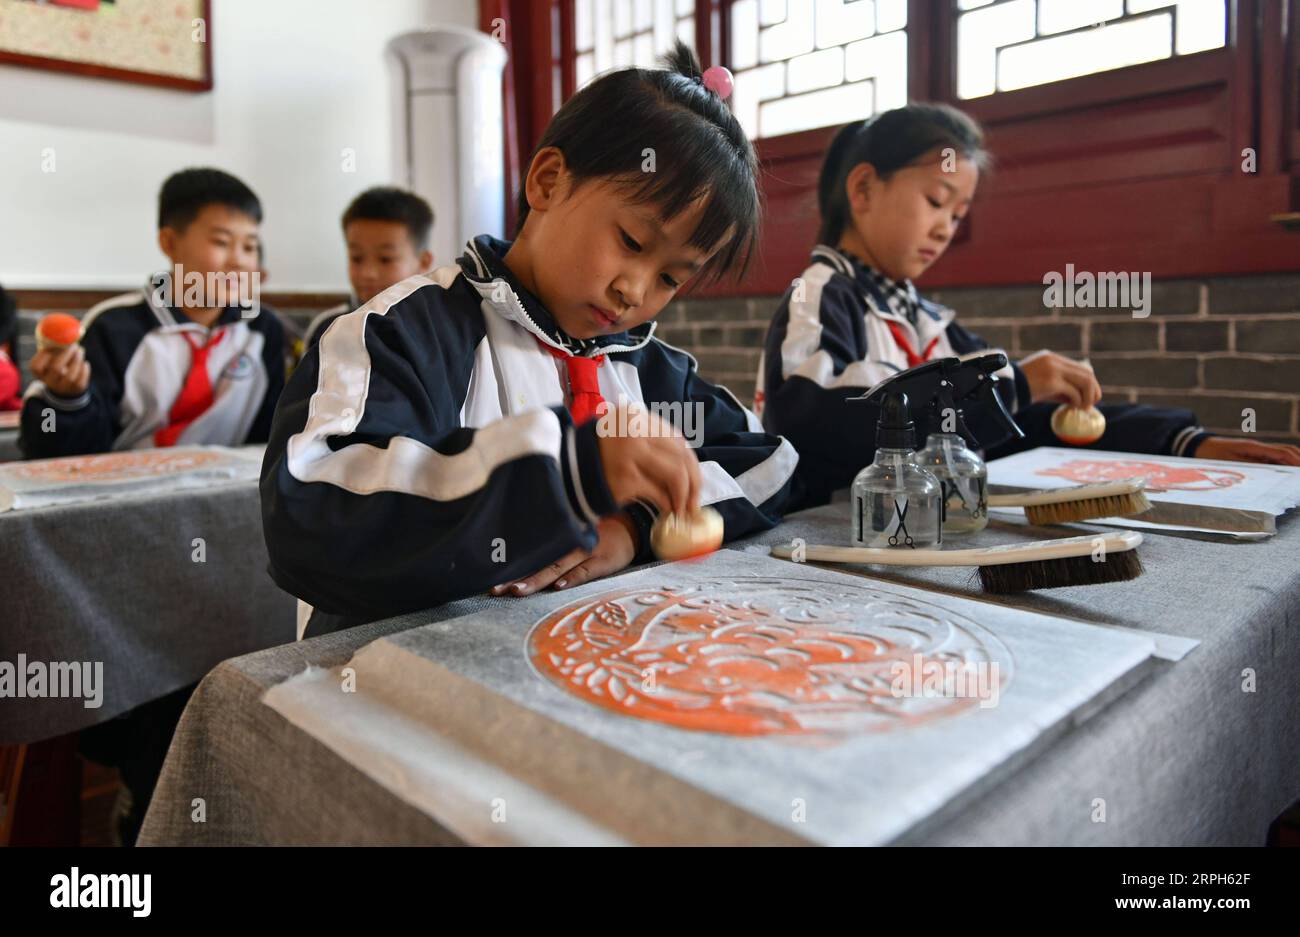 191031 -- JINAN, Oct. 31, 2019 -- Pupils of Xixian primary school experience the art of rubbing at Lubei intangible cultural heritage experiencing center in Wudi County, east China s Shandong Province, Oct. 30, 2019. The experiencing center provides a variety of intangible cultural heritage experiencing programs, including the arts of rubbing, ceramics, tie dyeing, paper-making and movable-type printing, aiming to promote traditional Chinese culture through immersive experience.  CHINA-SHANDONG-JINAN-INTANGIBLE CULTURAL HERITAGE-CENTER CN ZhuxZheng PUBLICATIONxNOTxINxCHN Stock Photo